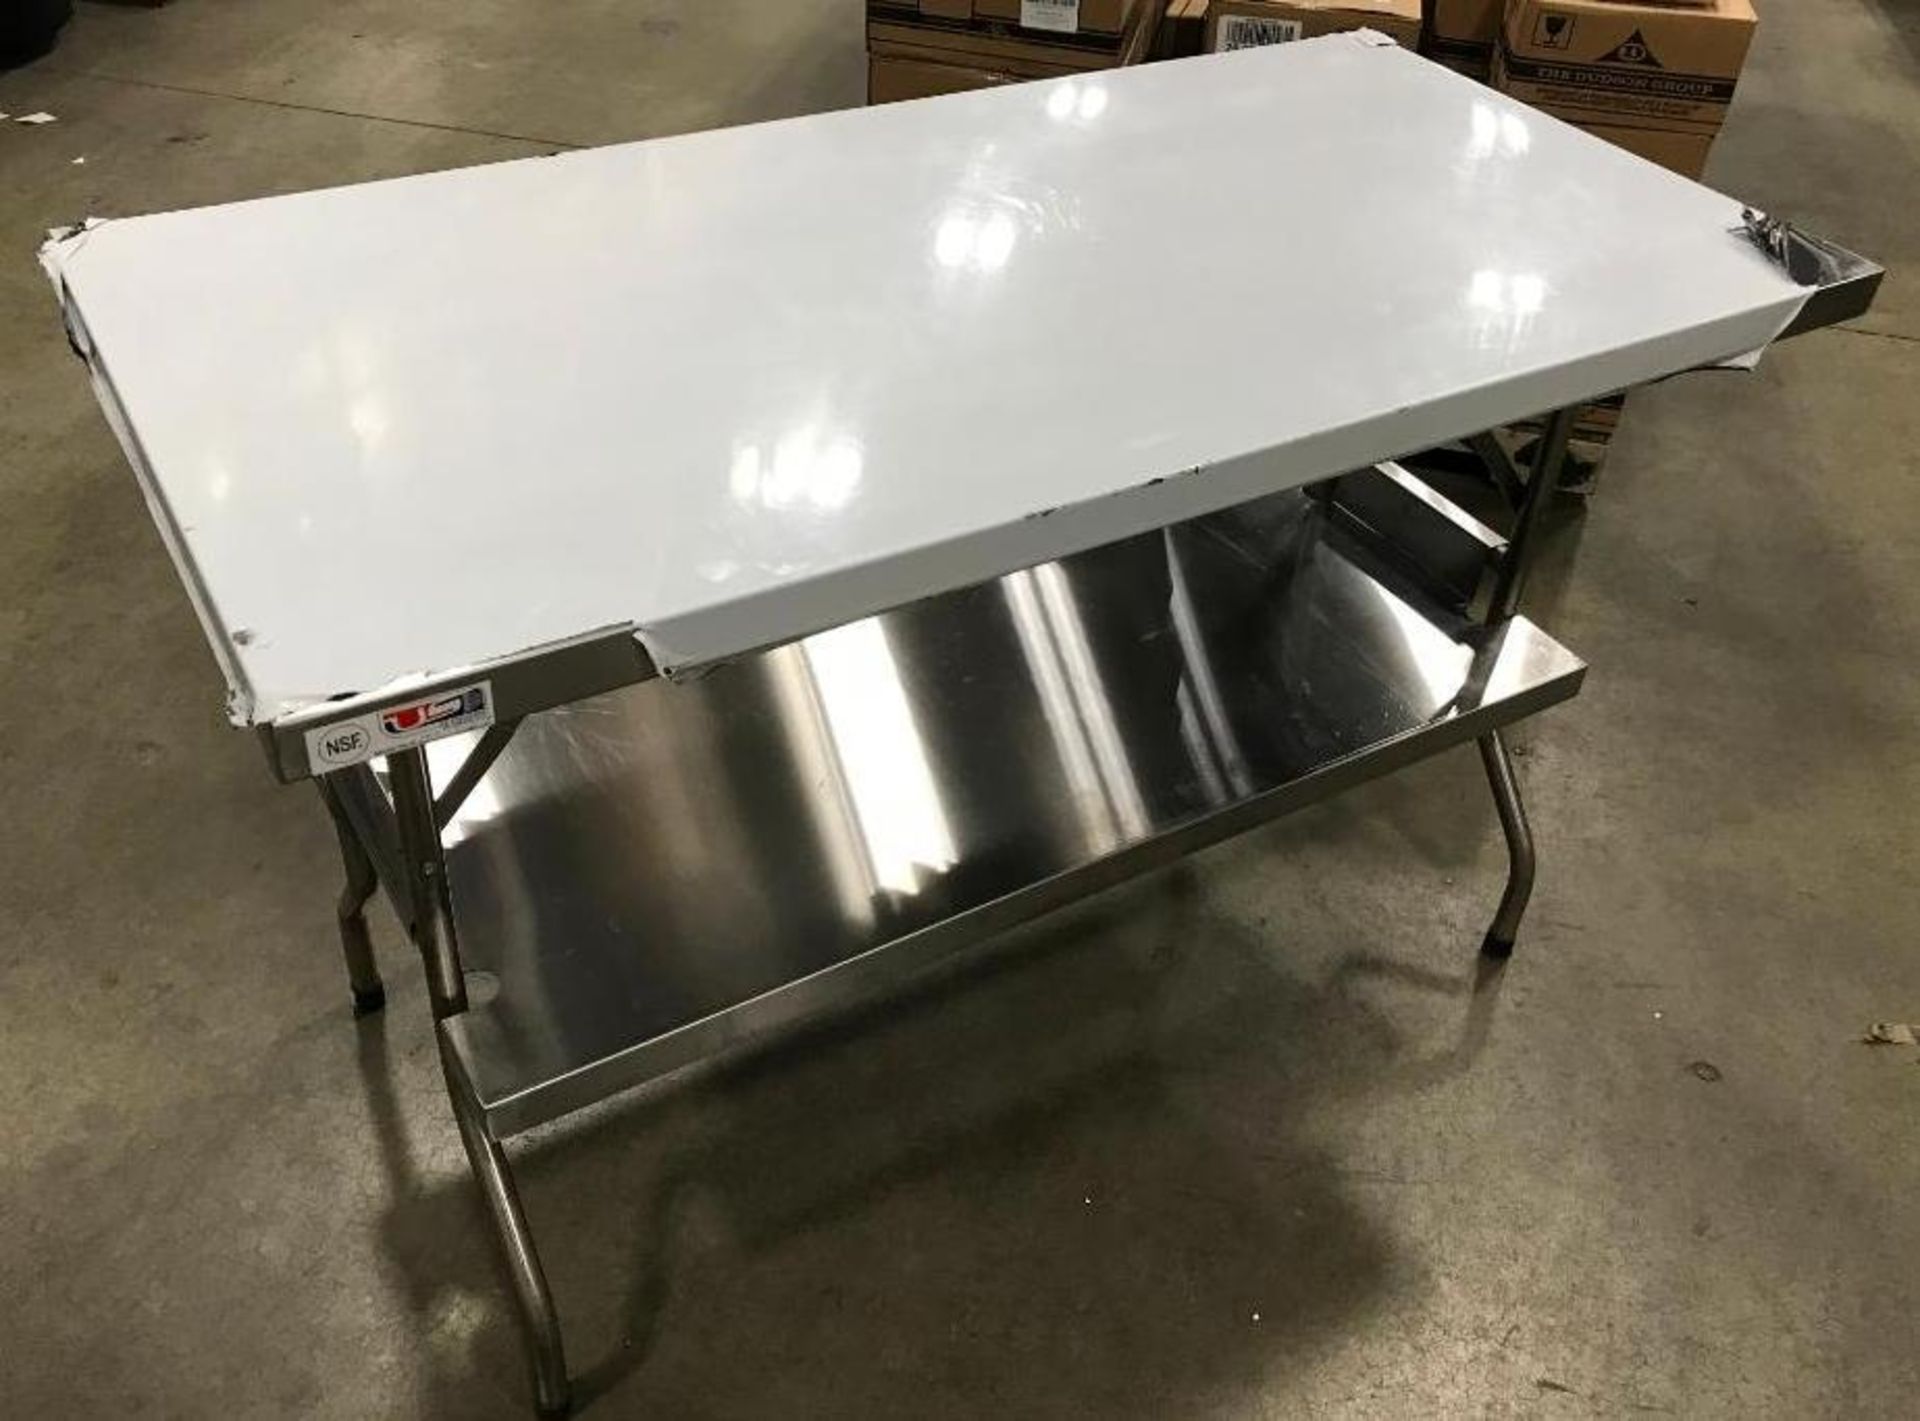 48" X 24" STAINLESS STEEL FOLDING TABLE